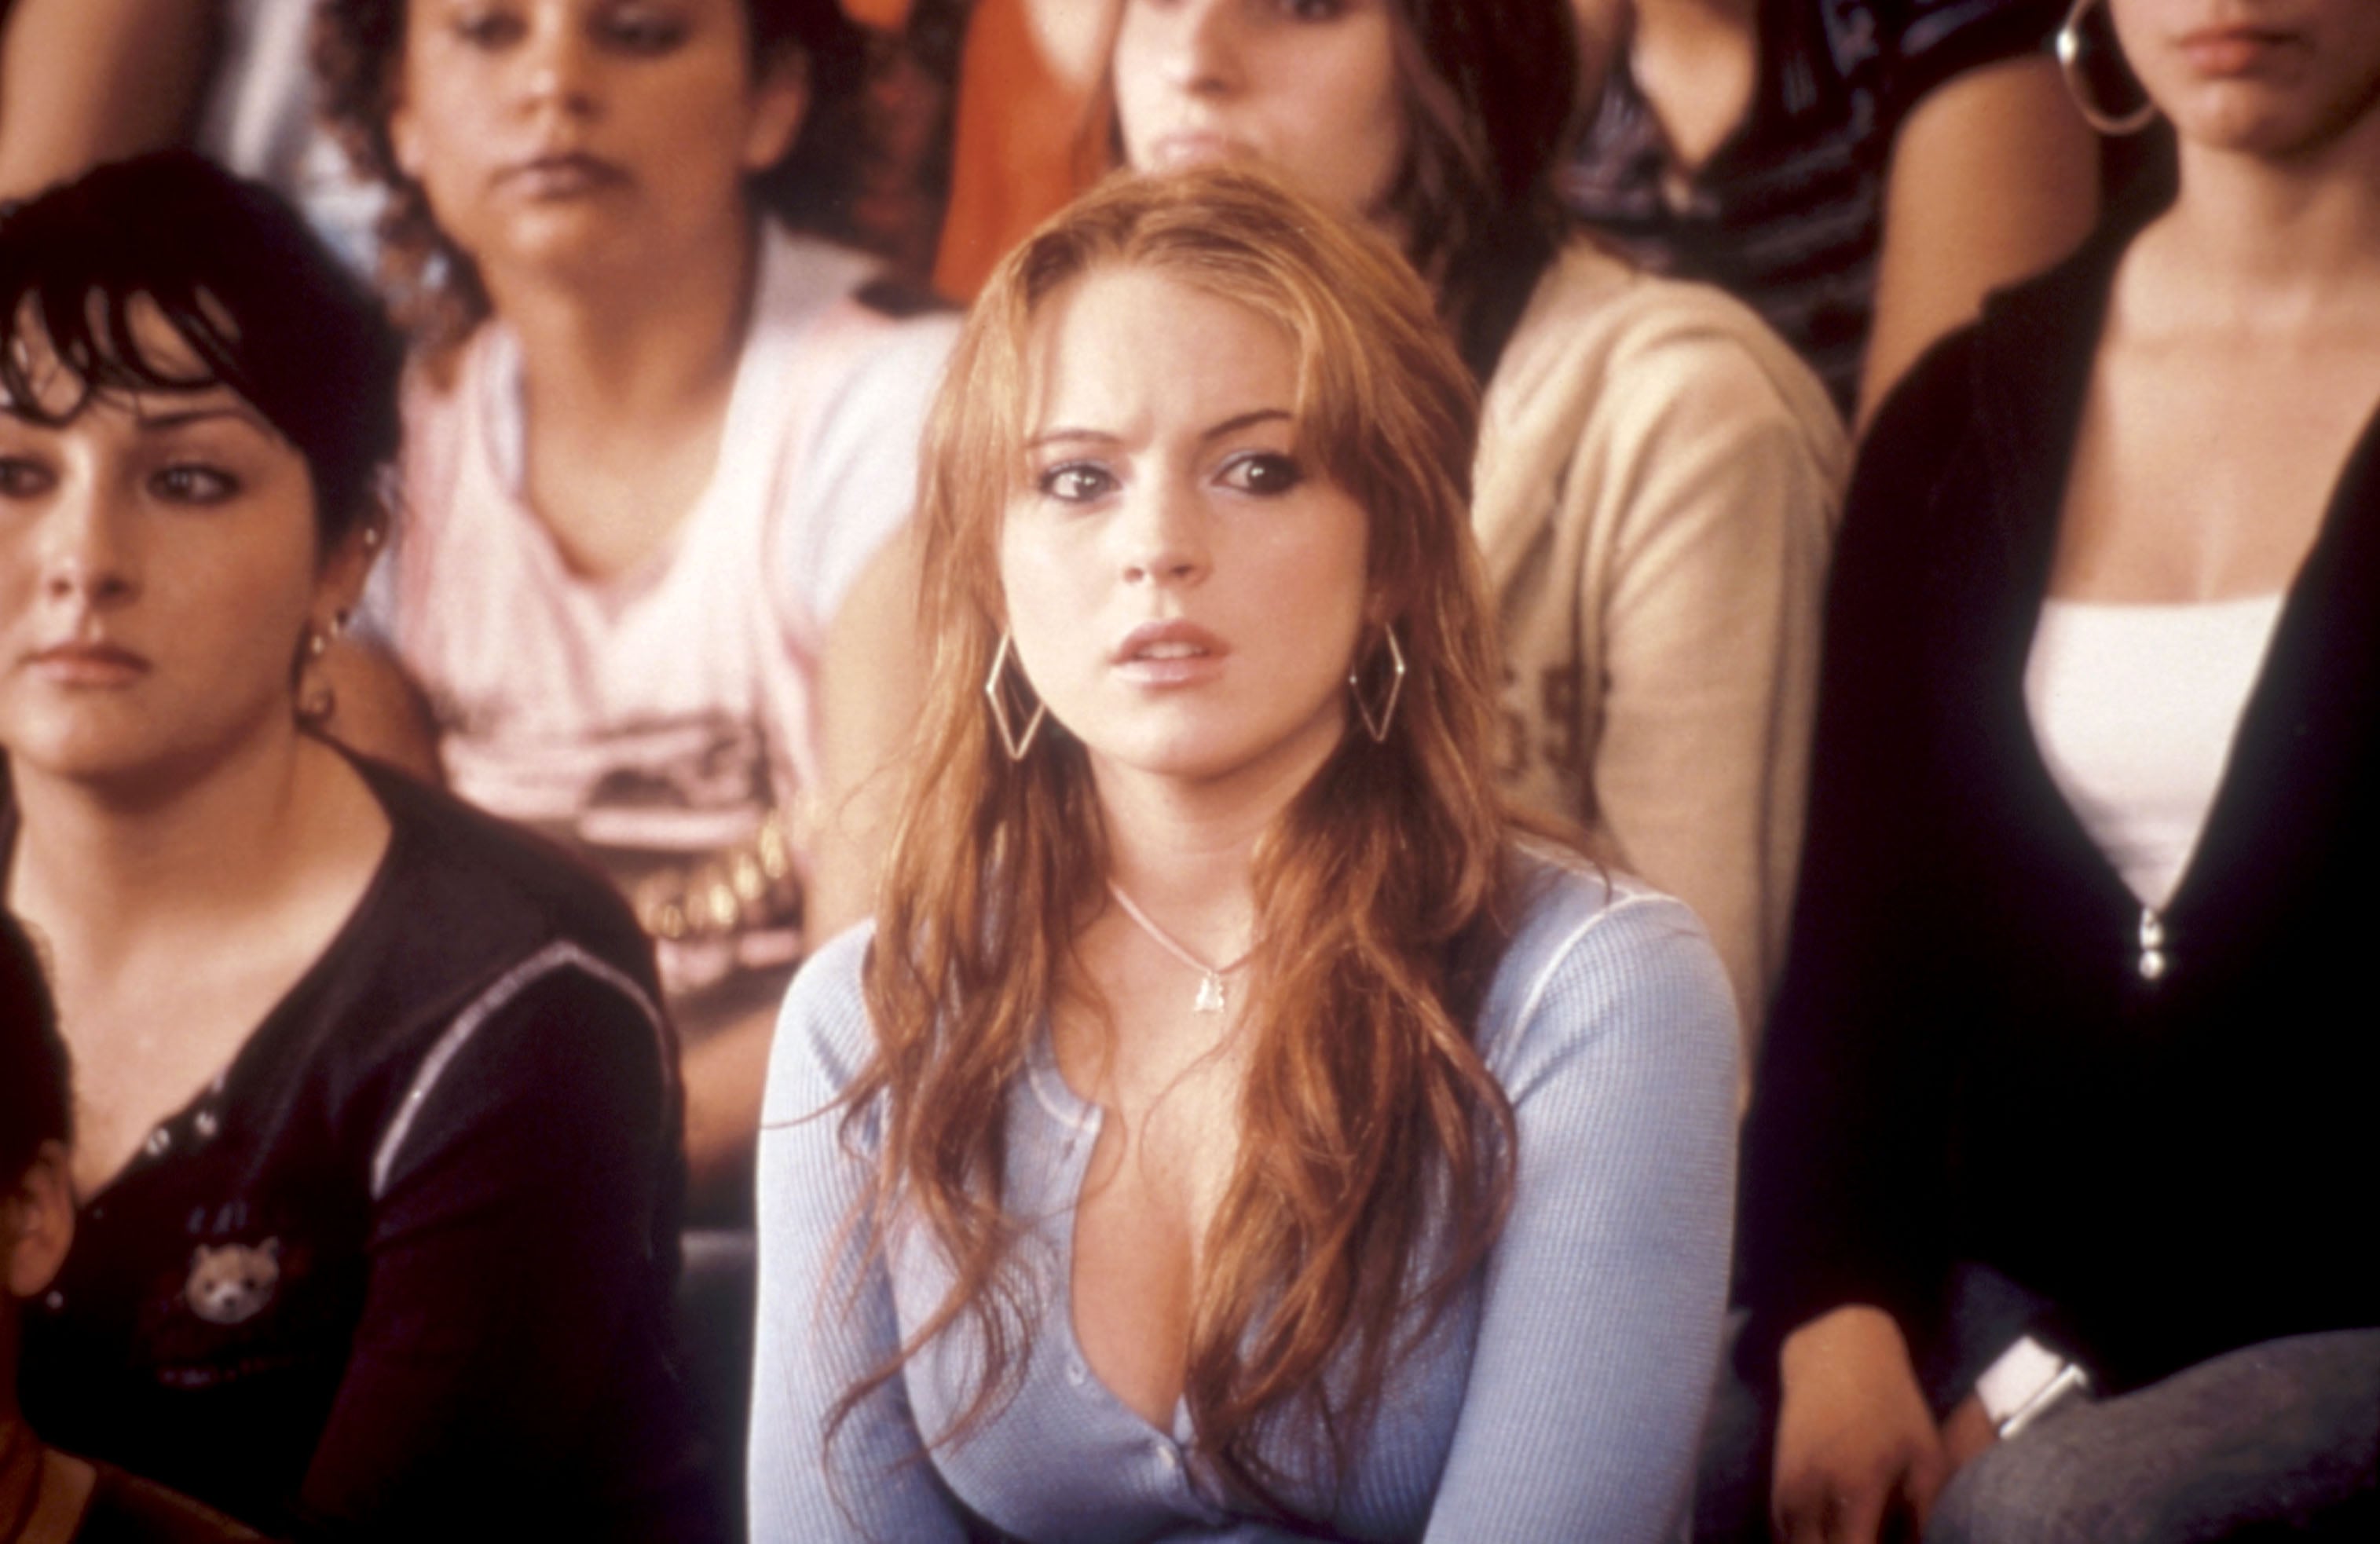 Lindsay Lohan Looks Back at Some of Her Most Iconic Early Movie Looks